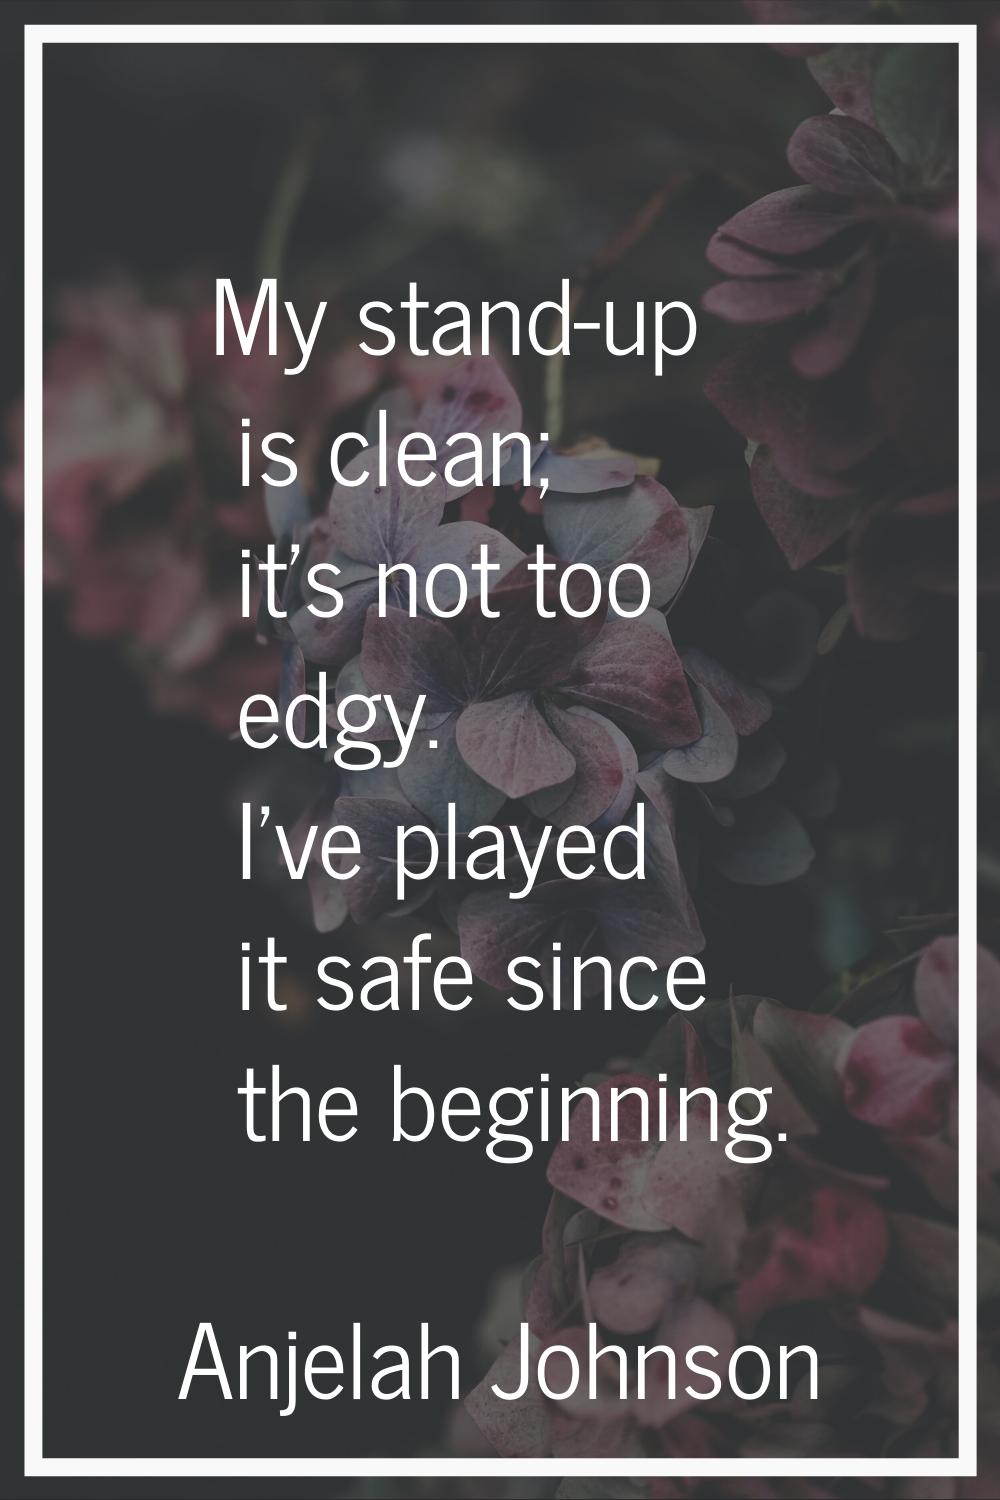 My stand-up is clean; it's not too edgy. I've played it safe since the beginning.